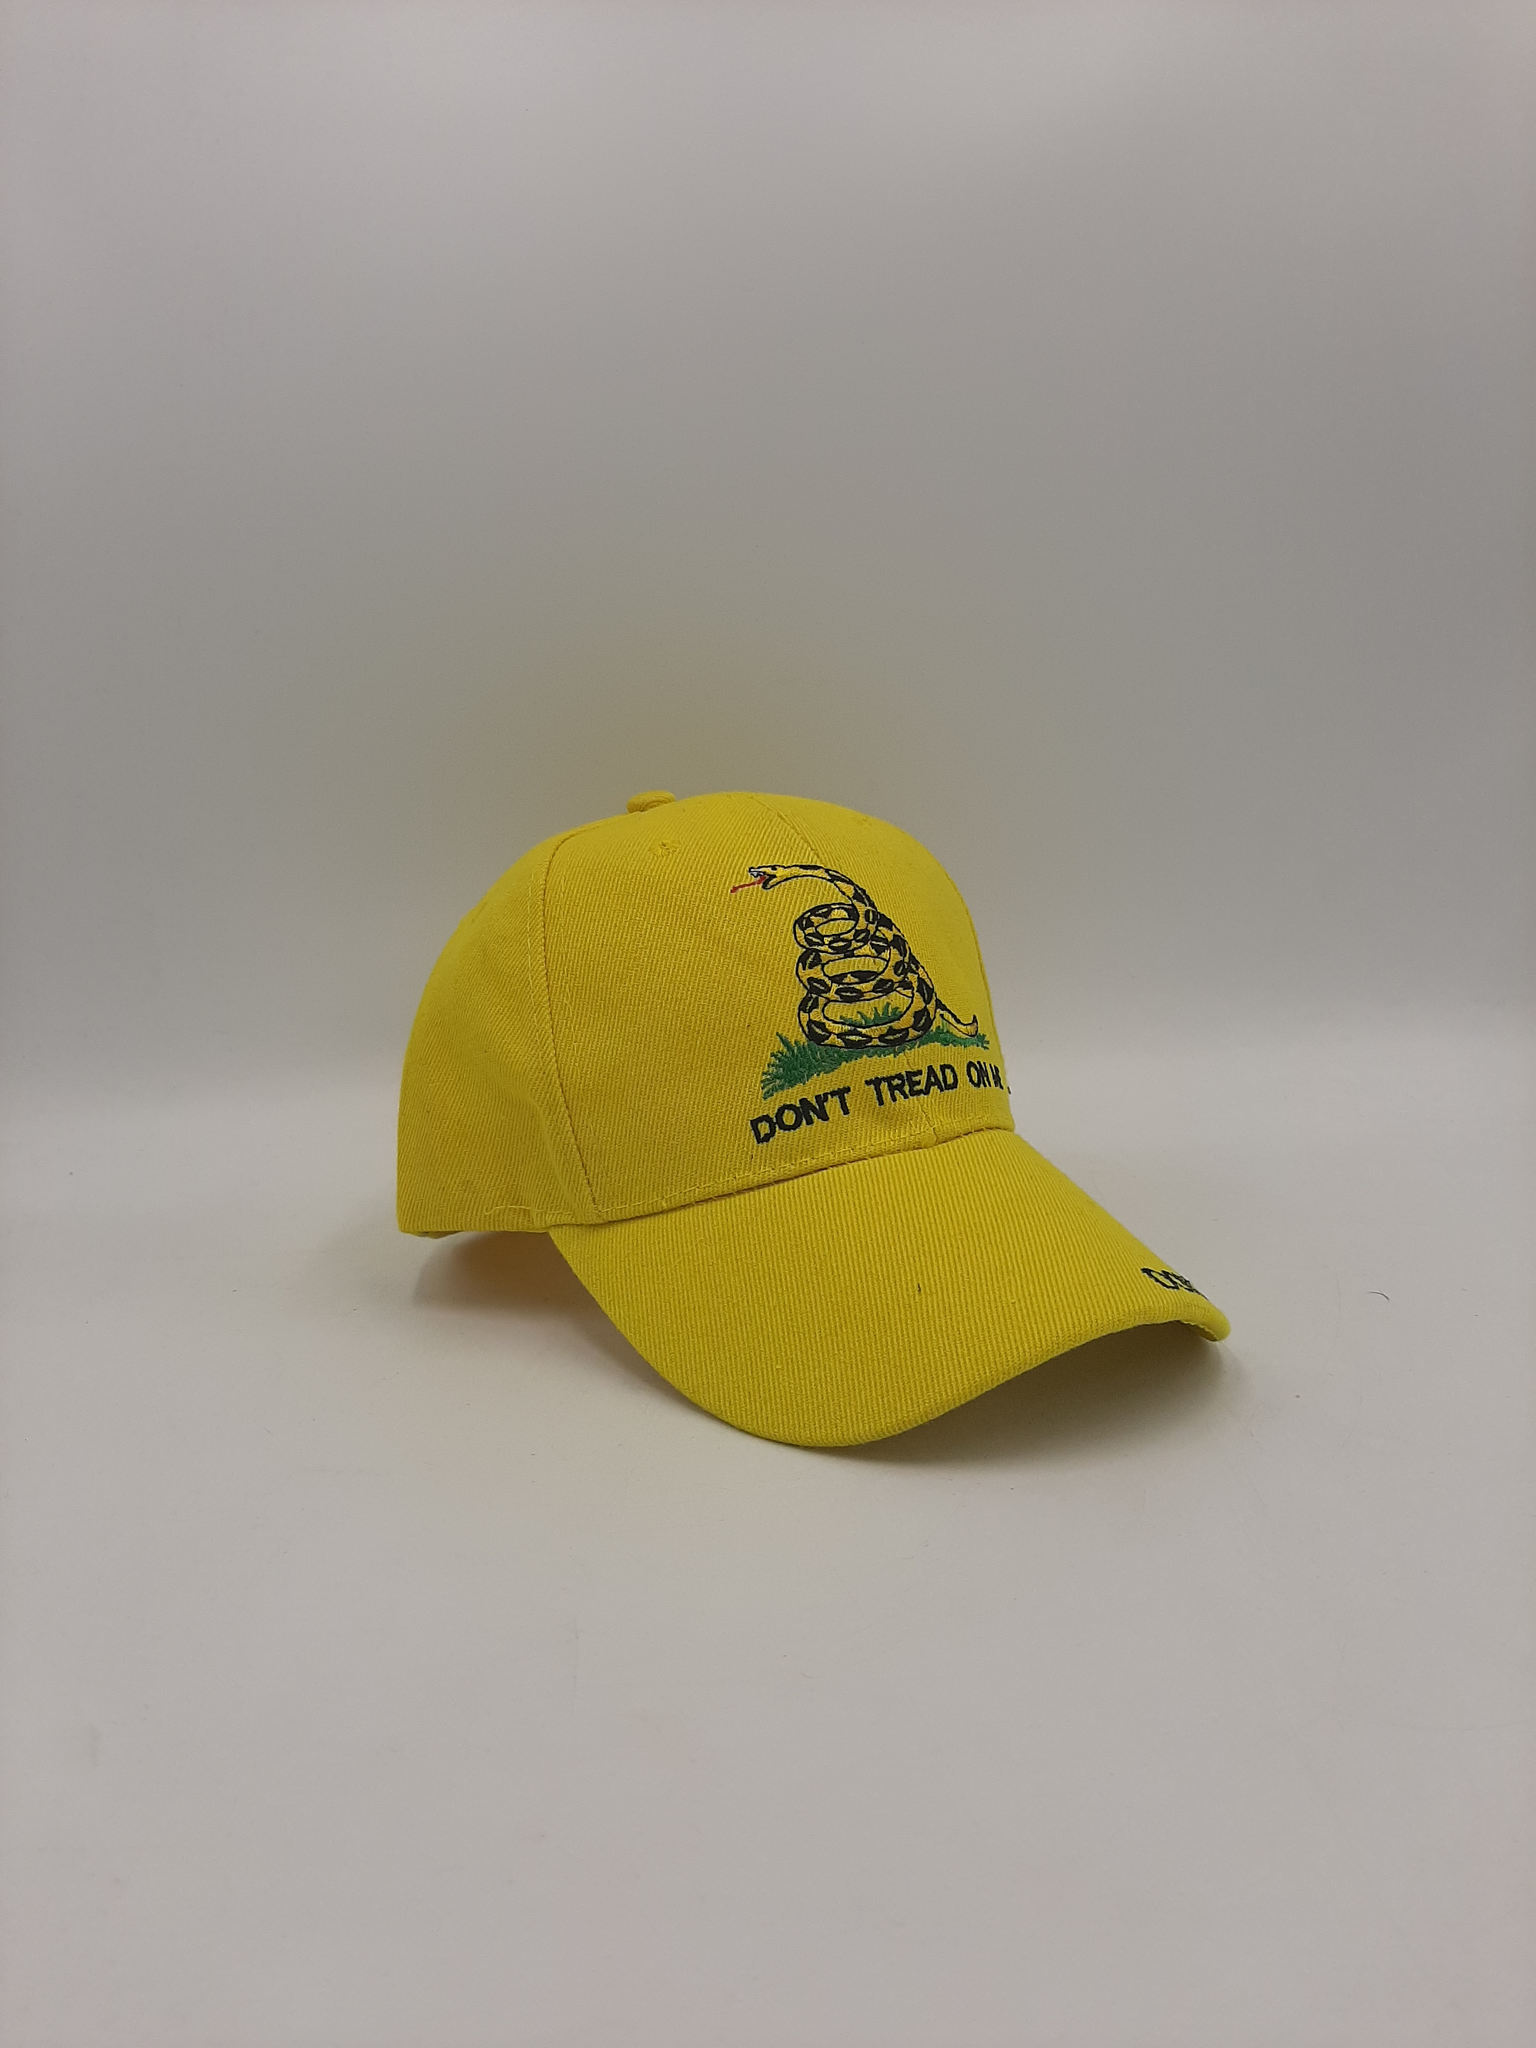 "Don't Tread on Me" Snake (Gadsden) embroidered Freedom Hat